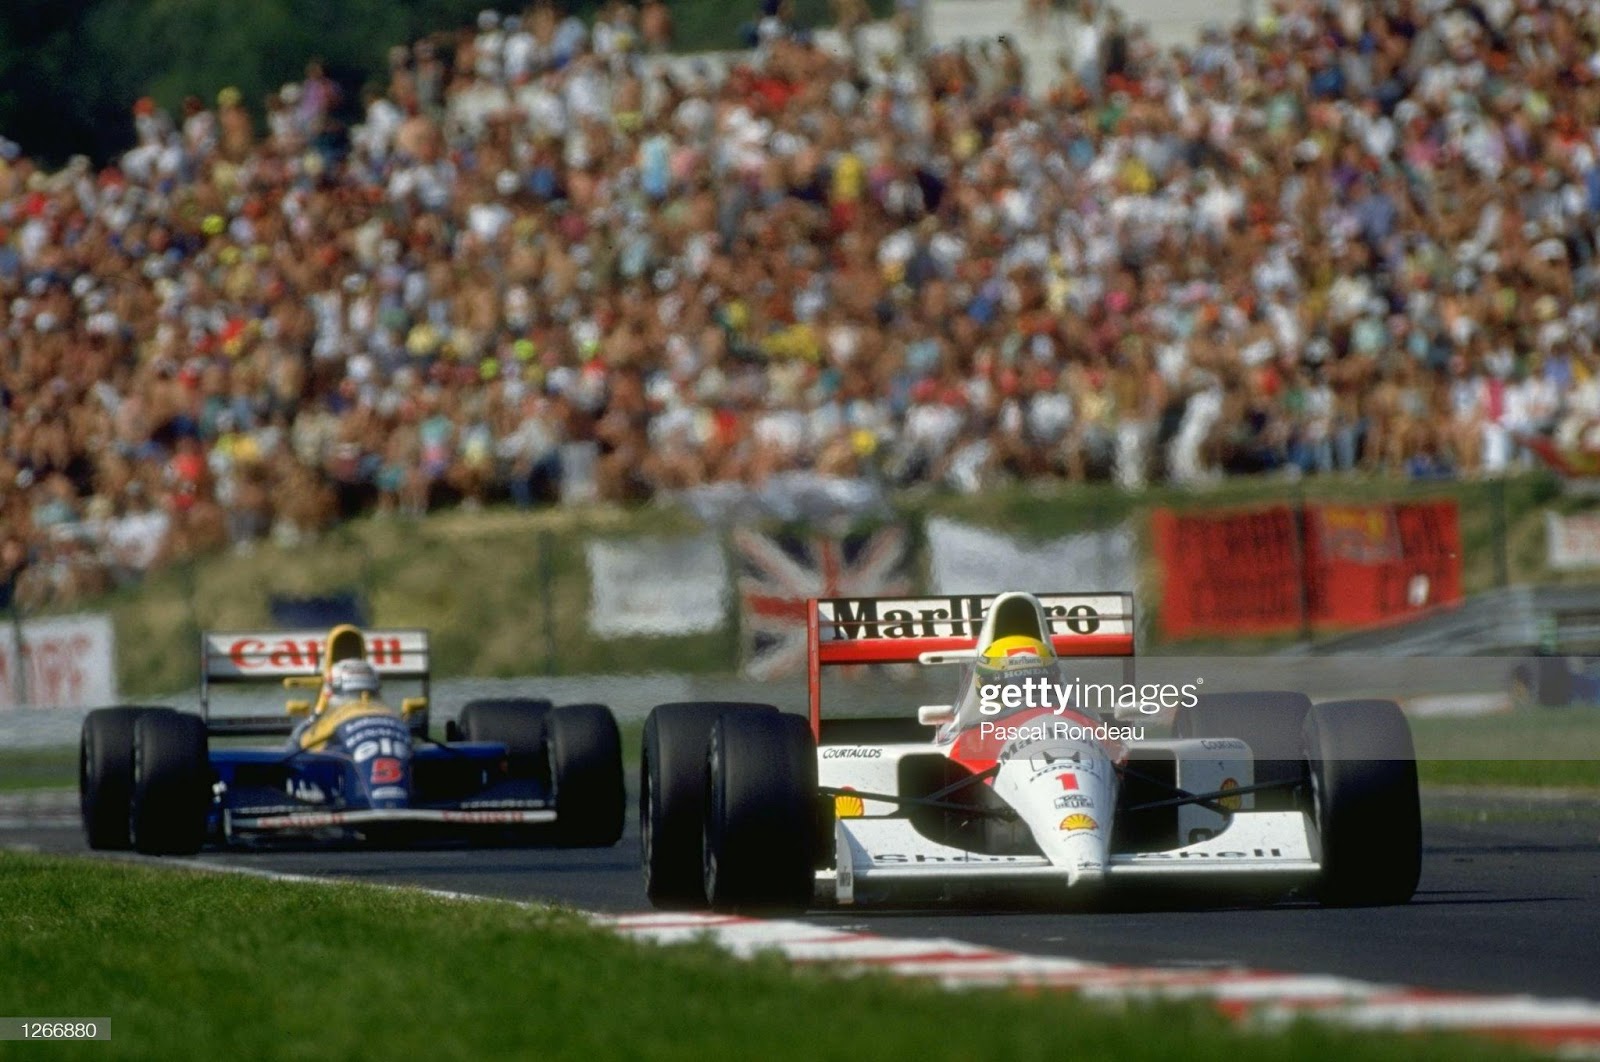 1991: Williams Renault driver Nigel Mansell chases McLaren Honda driver Ayrton Senna to the line during the Hungarian Grand Prix at the Hungaroring circuit in Budapest, Hungary. Senna finished in first place and Mansell in second.